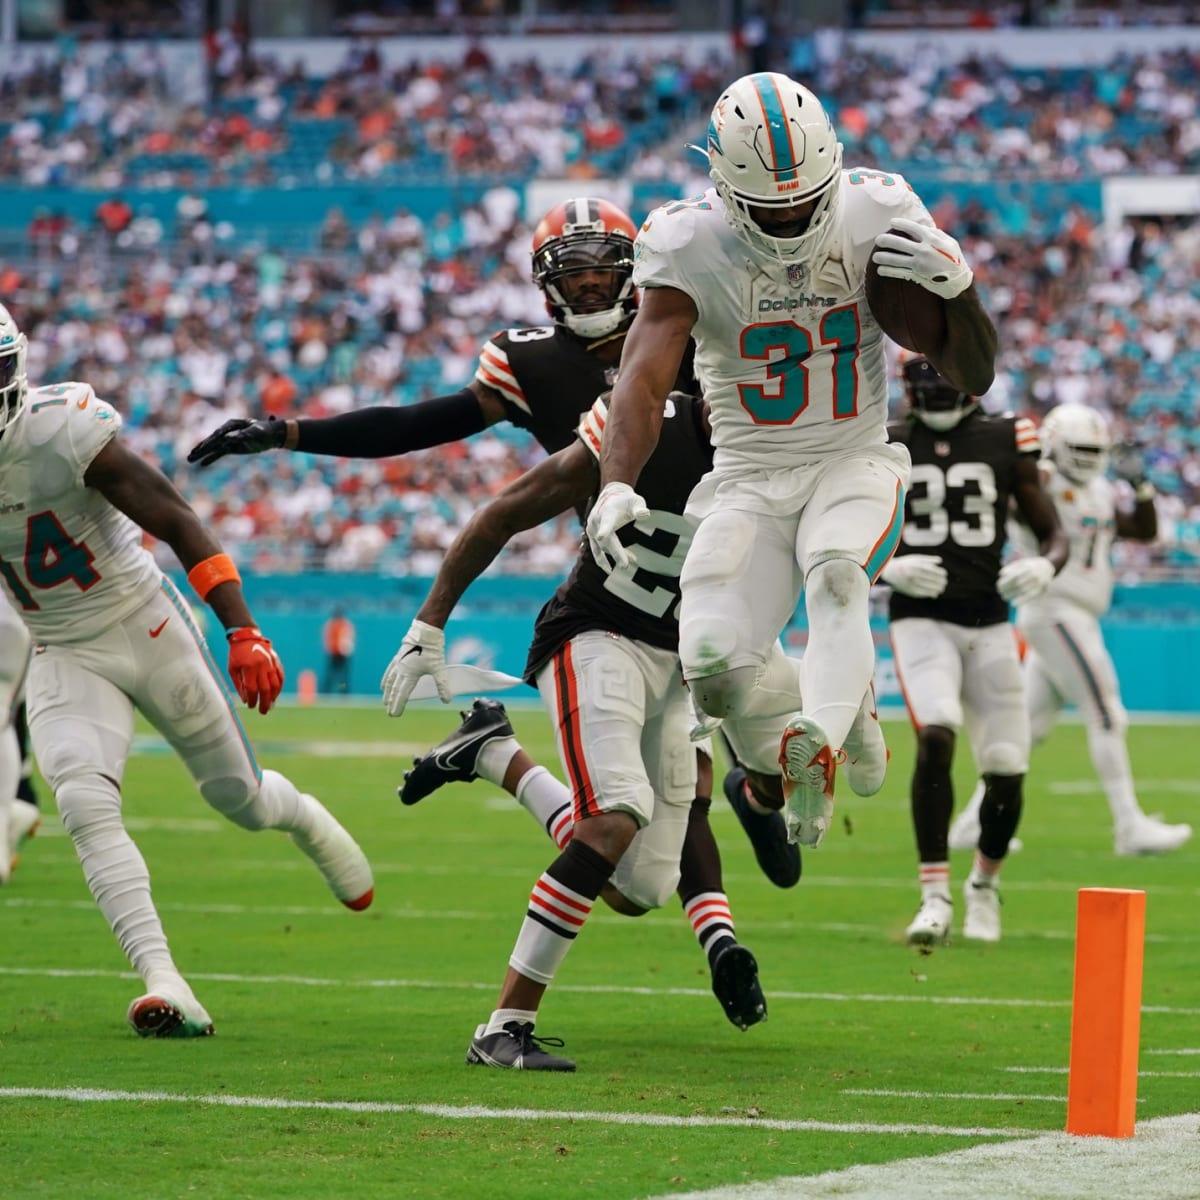 How to Stream the Broncos vs. Dolphins Game Live - Week 3